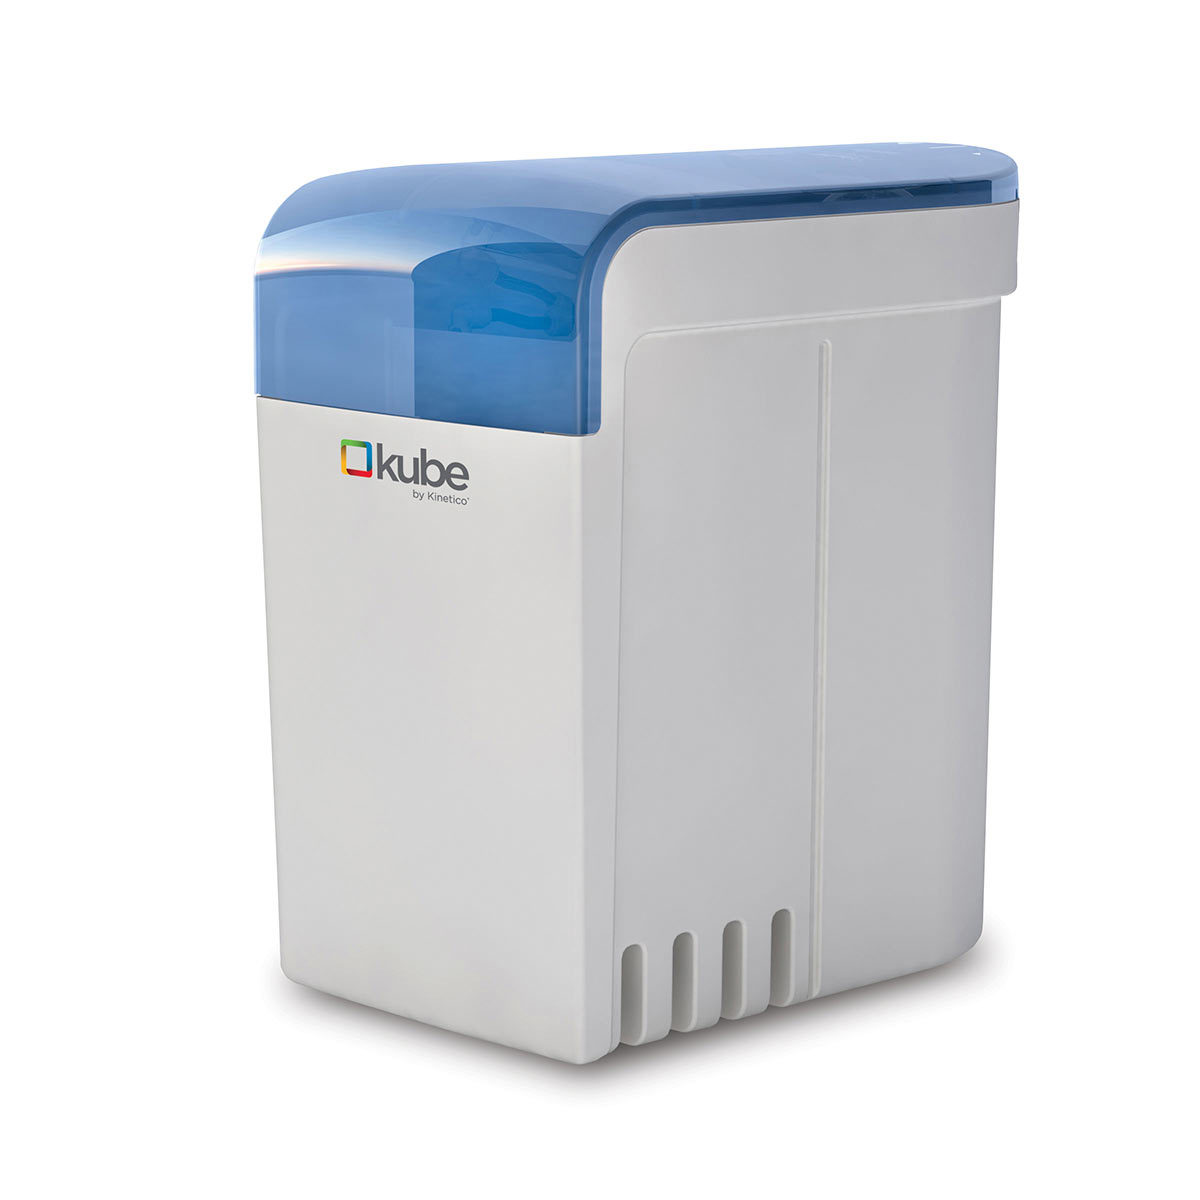 Kinetico Kube 2 Non-Electric Water Softener - For Households with up to 4 Bathrooms